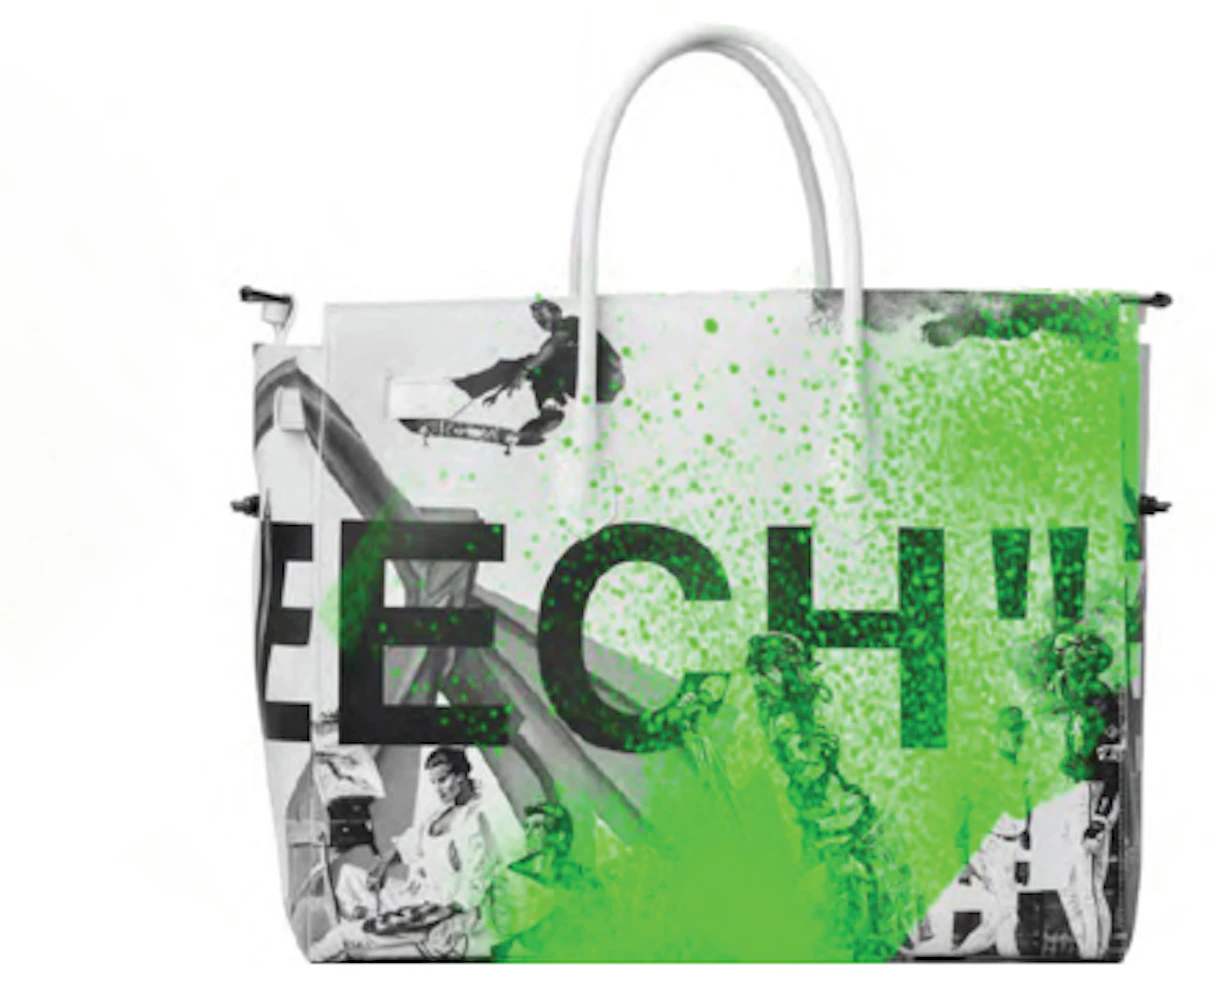 OFF-WHITE Virgil Abloh ICA Square Bag XL White/Green in Leather - US